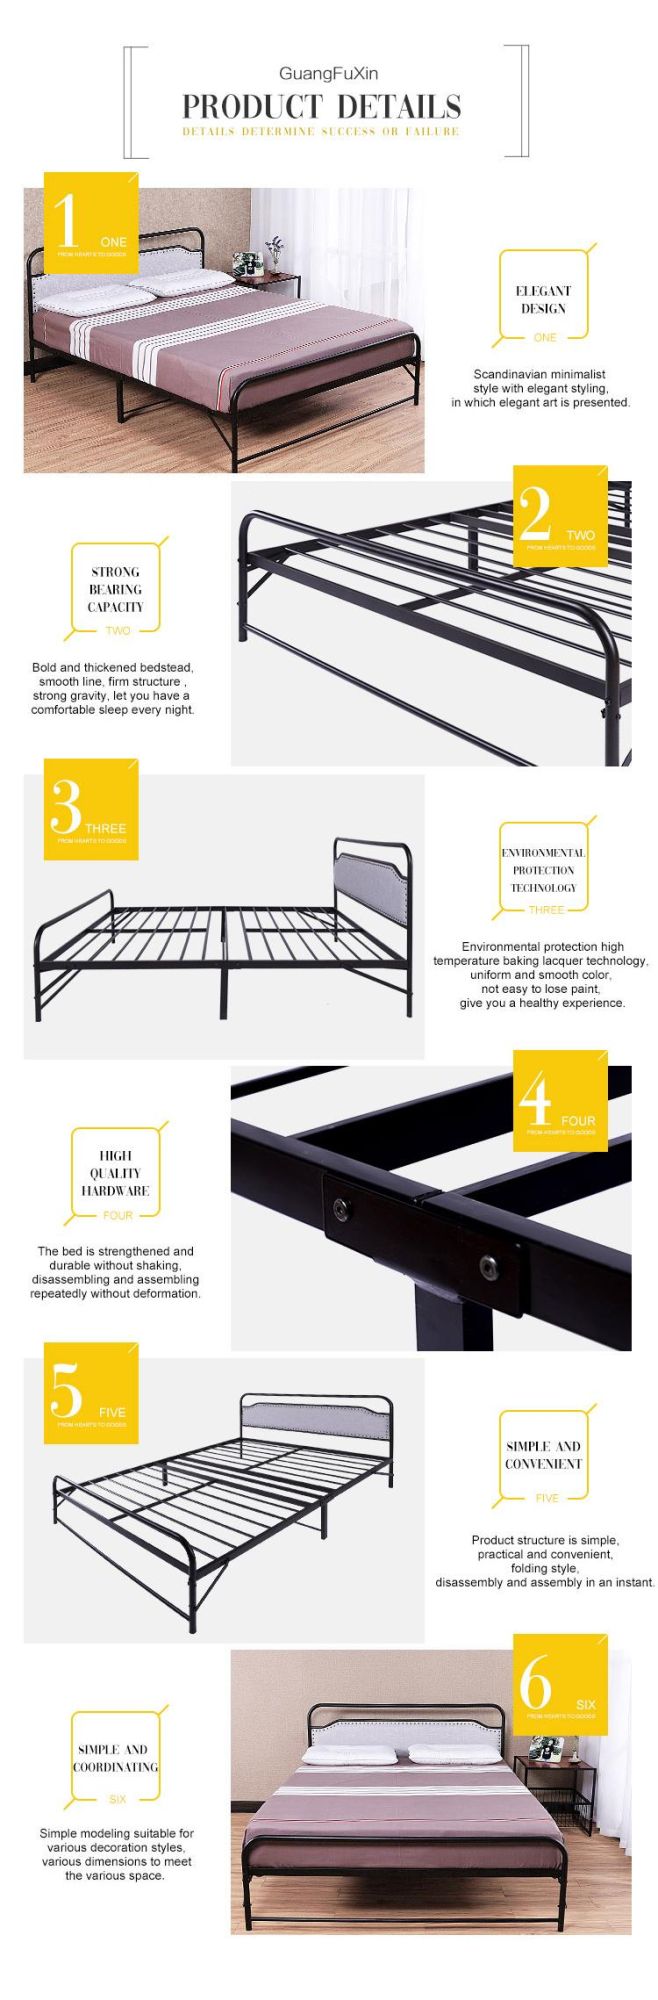 Fabrication Cheap Queen Size Double Metal Bed Frame